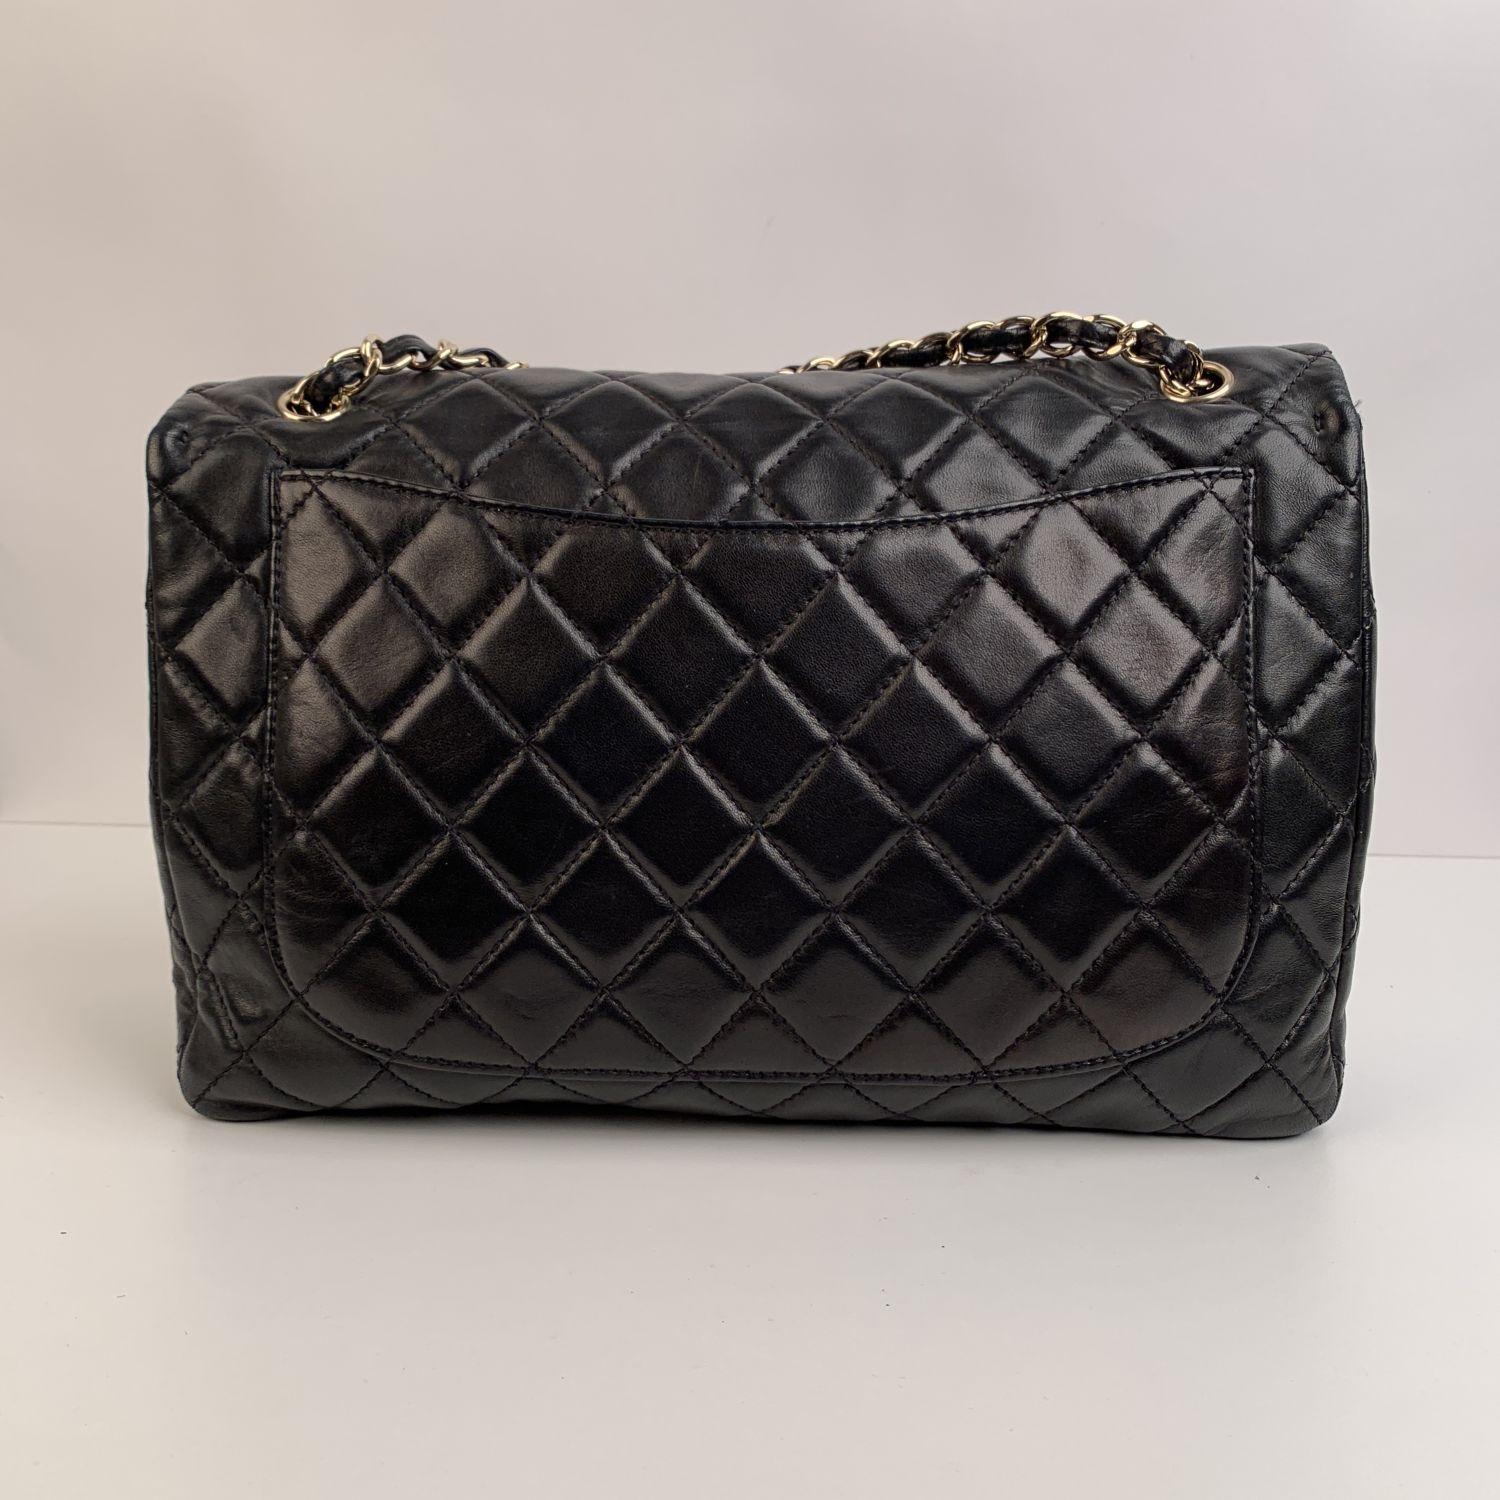 Chanel Black Quilted Leather Jumbo Classic Flap 2.55 Shoulder Bag 1